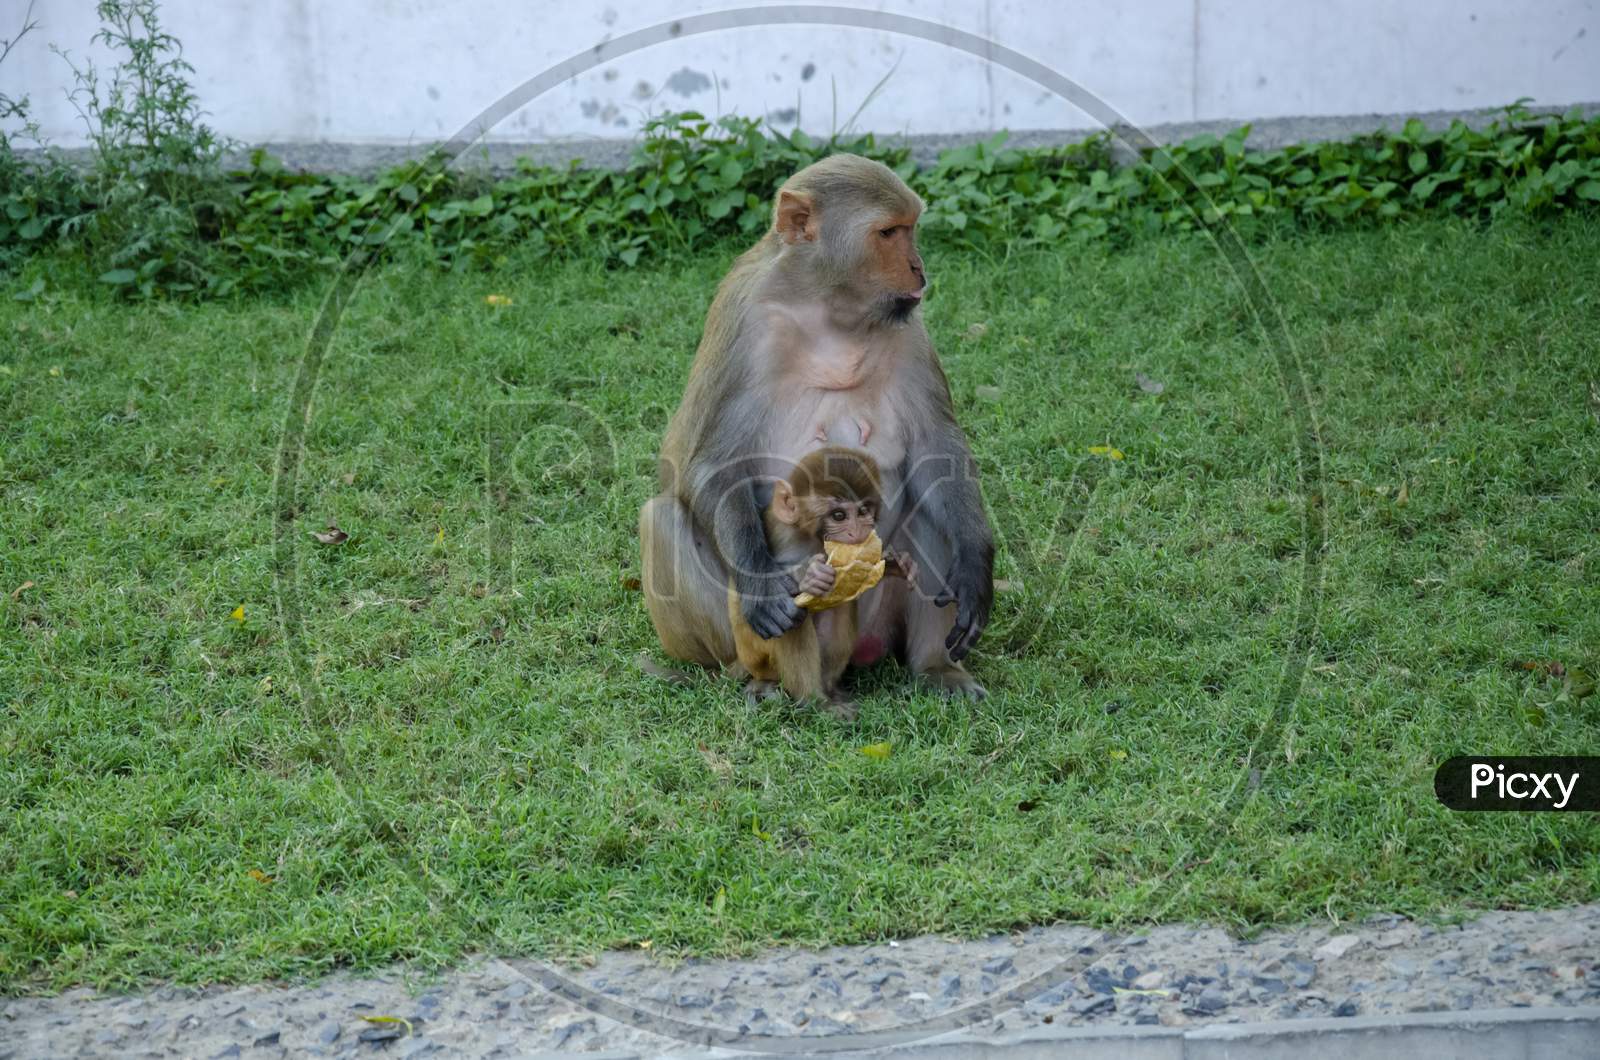 Mother monkey is feeding food to her baby.